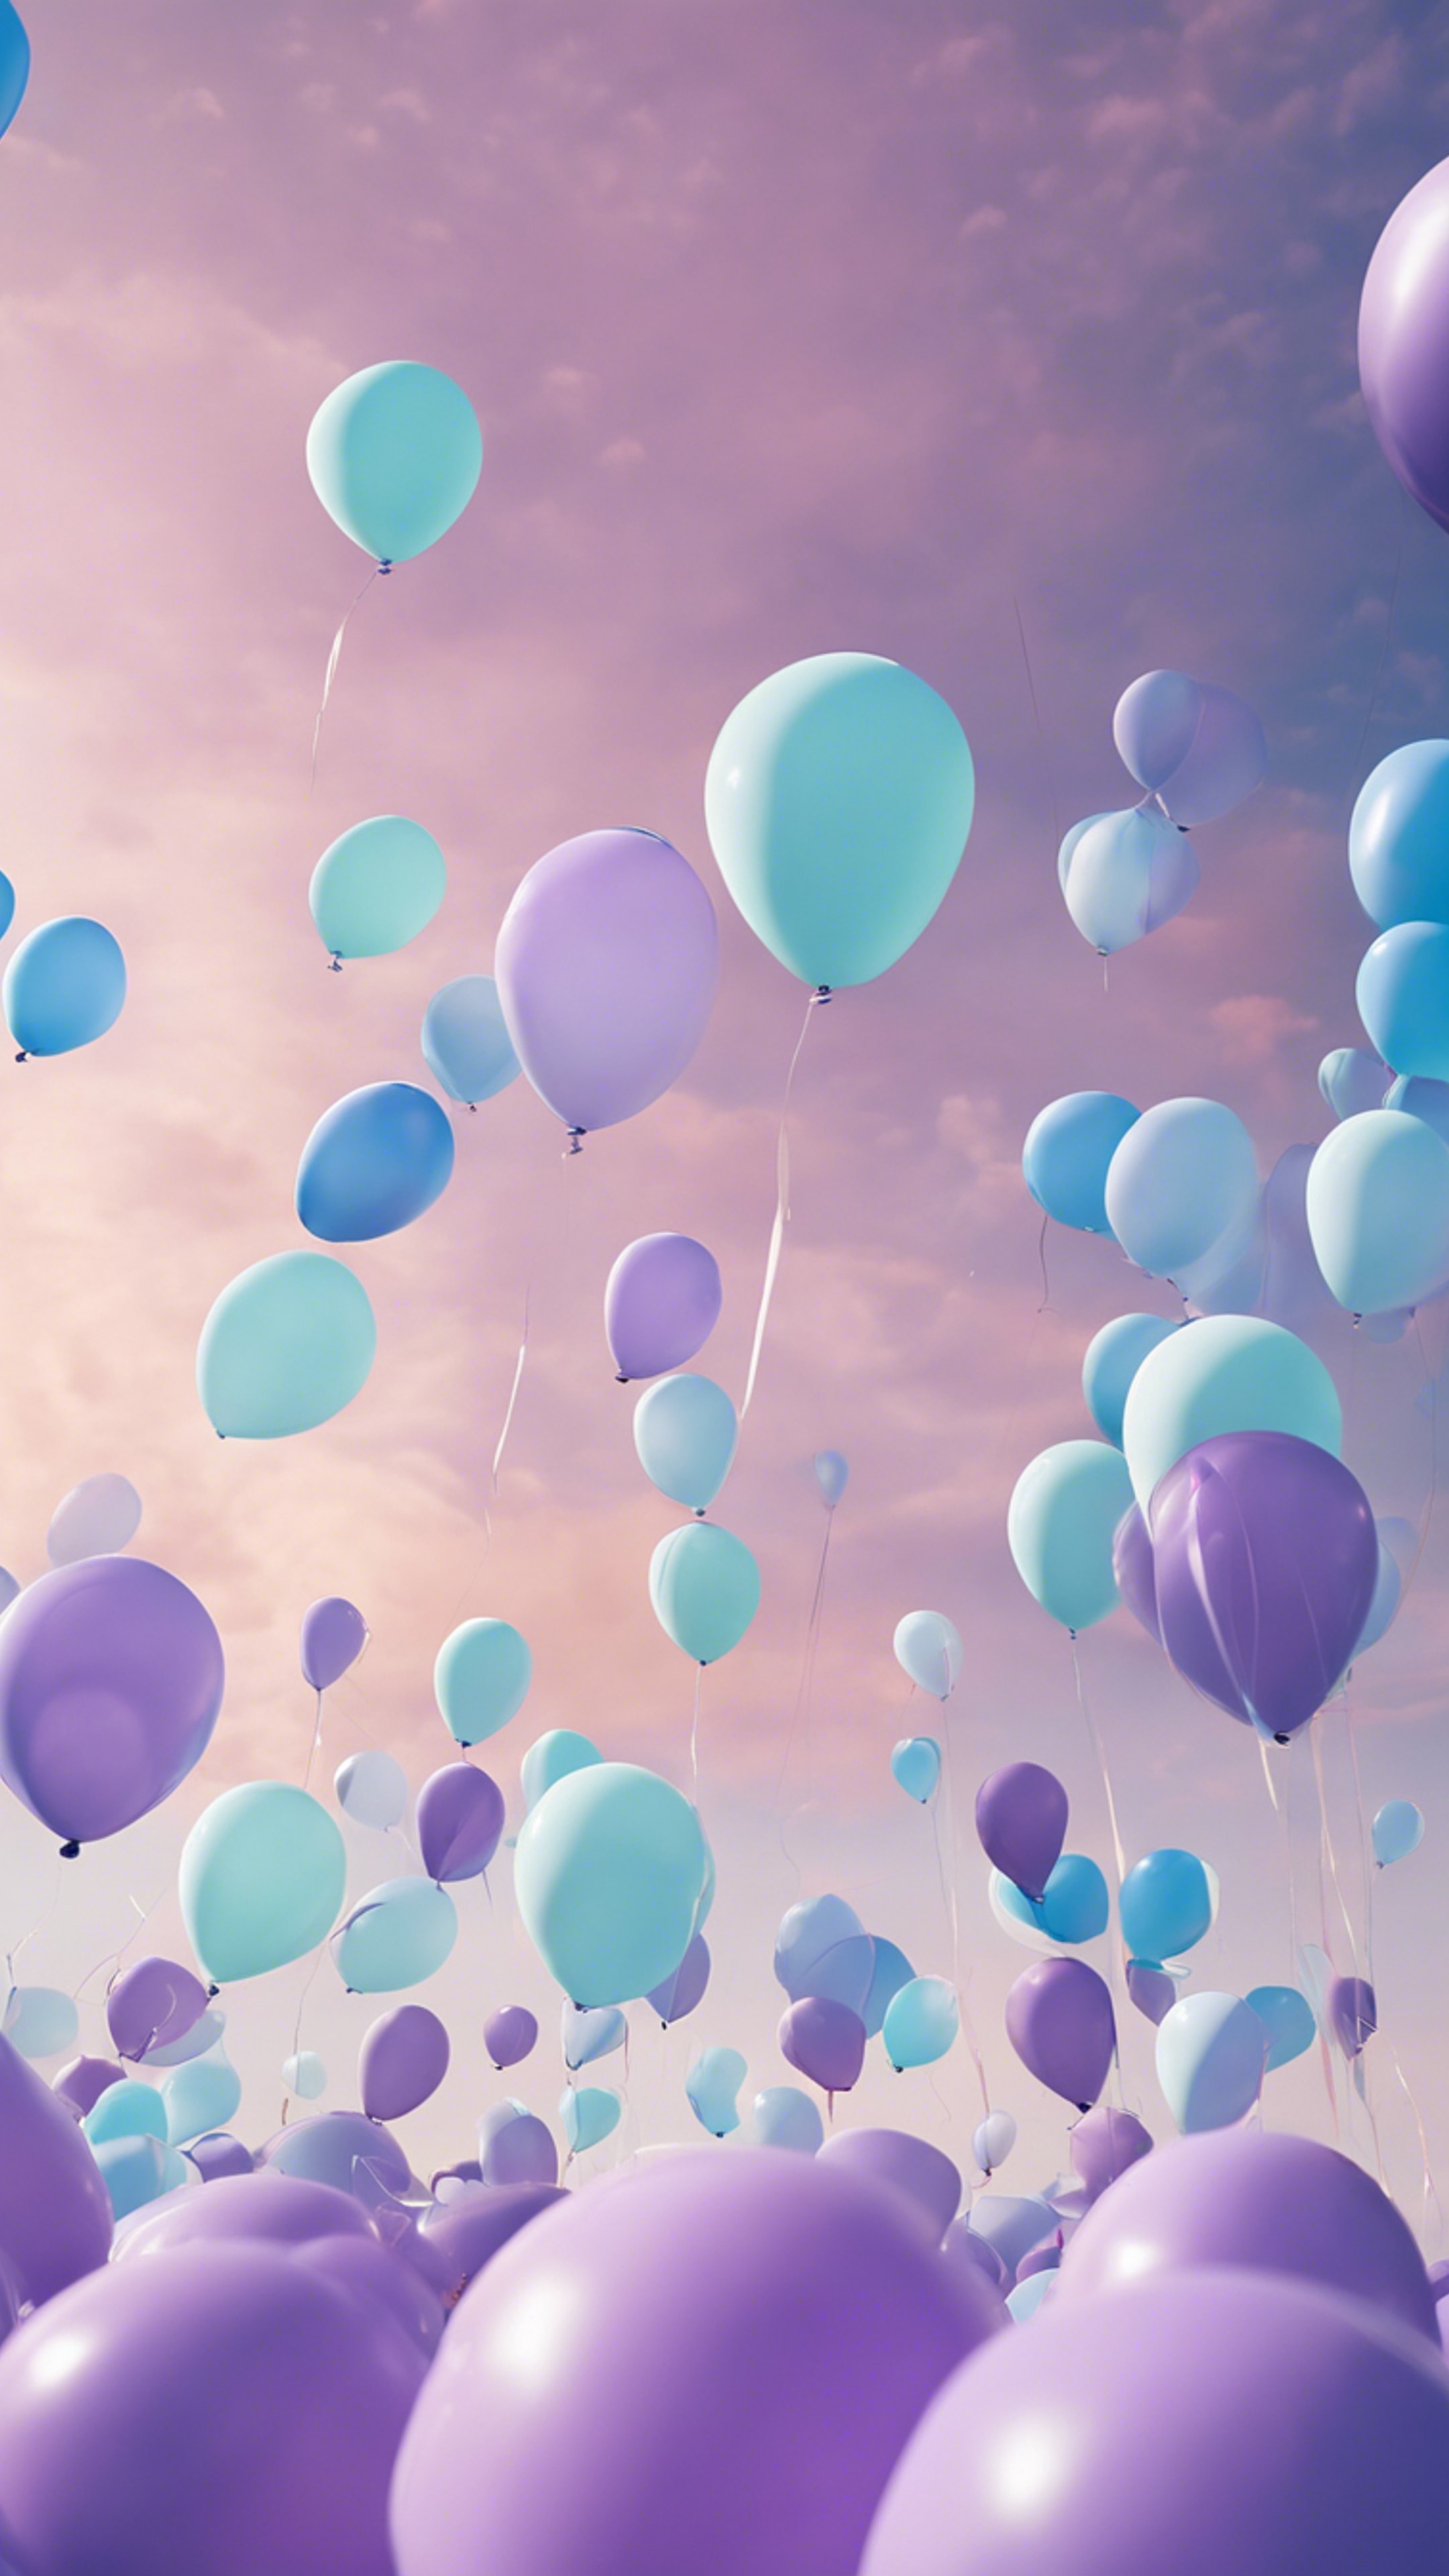 A whimsical scene of pastel purple and blue balloons filling the summer sky. Hình nền[fd1f8f768f0047c48fb6]